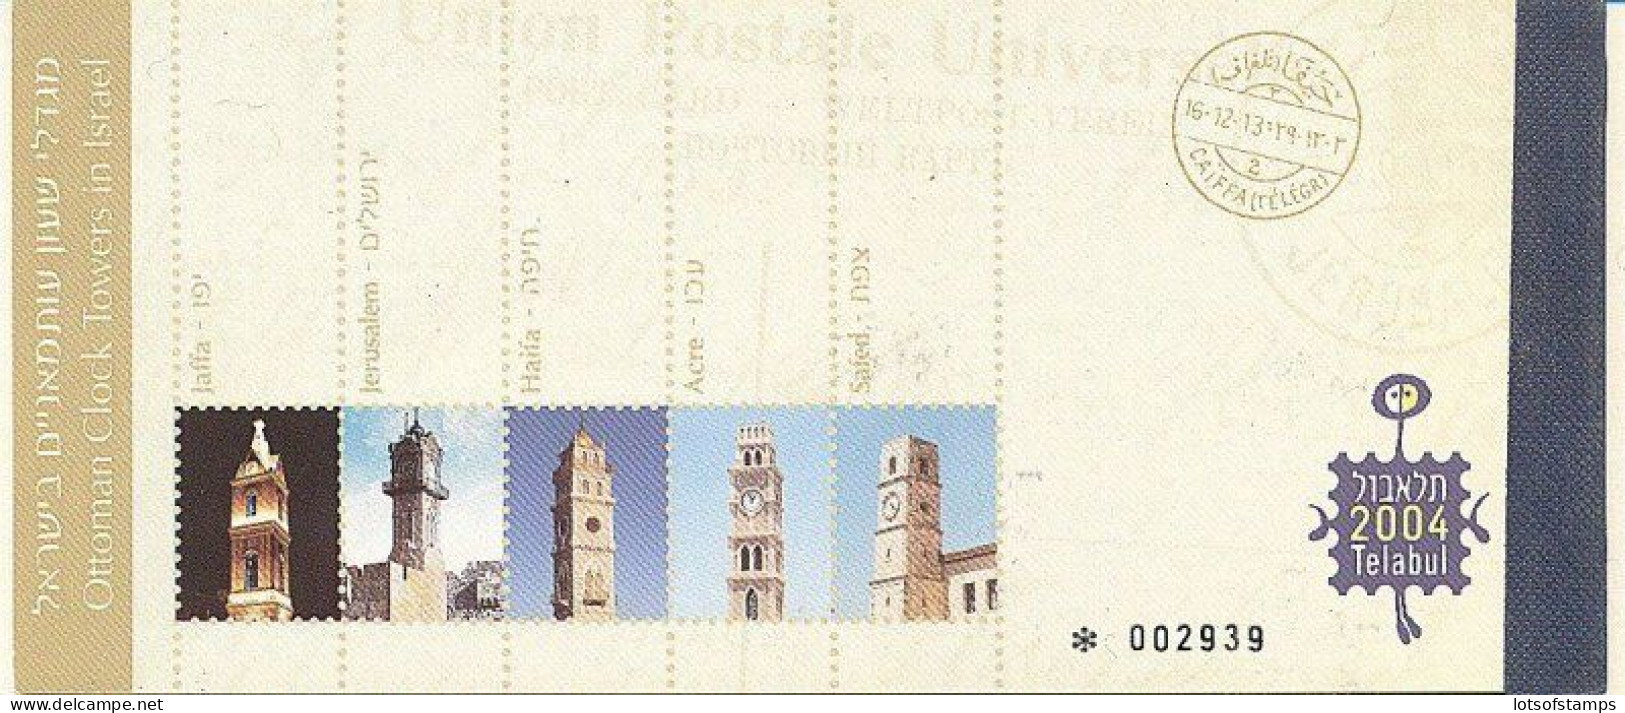 ISRAEL 2004 TEL AVIV EXHIBIT CLOCK TOWERS BOOKLET MNH - Covers & Documents